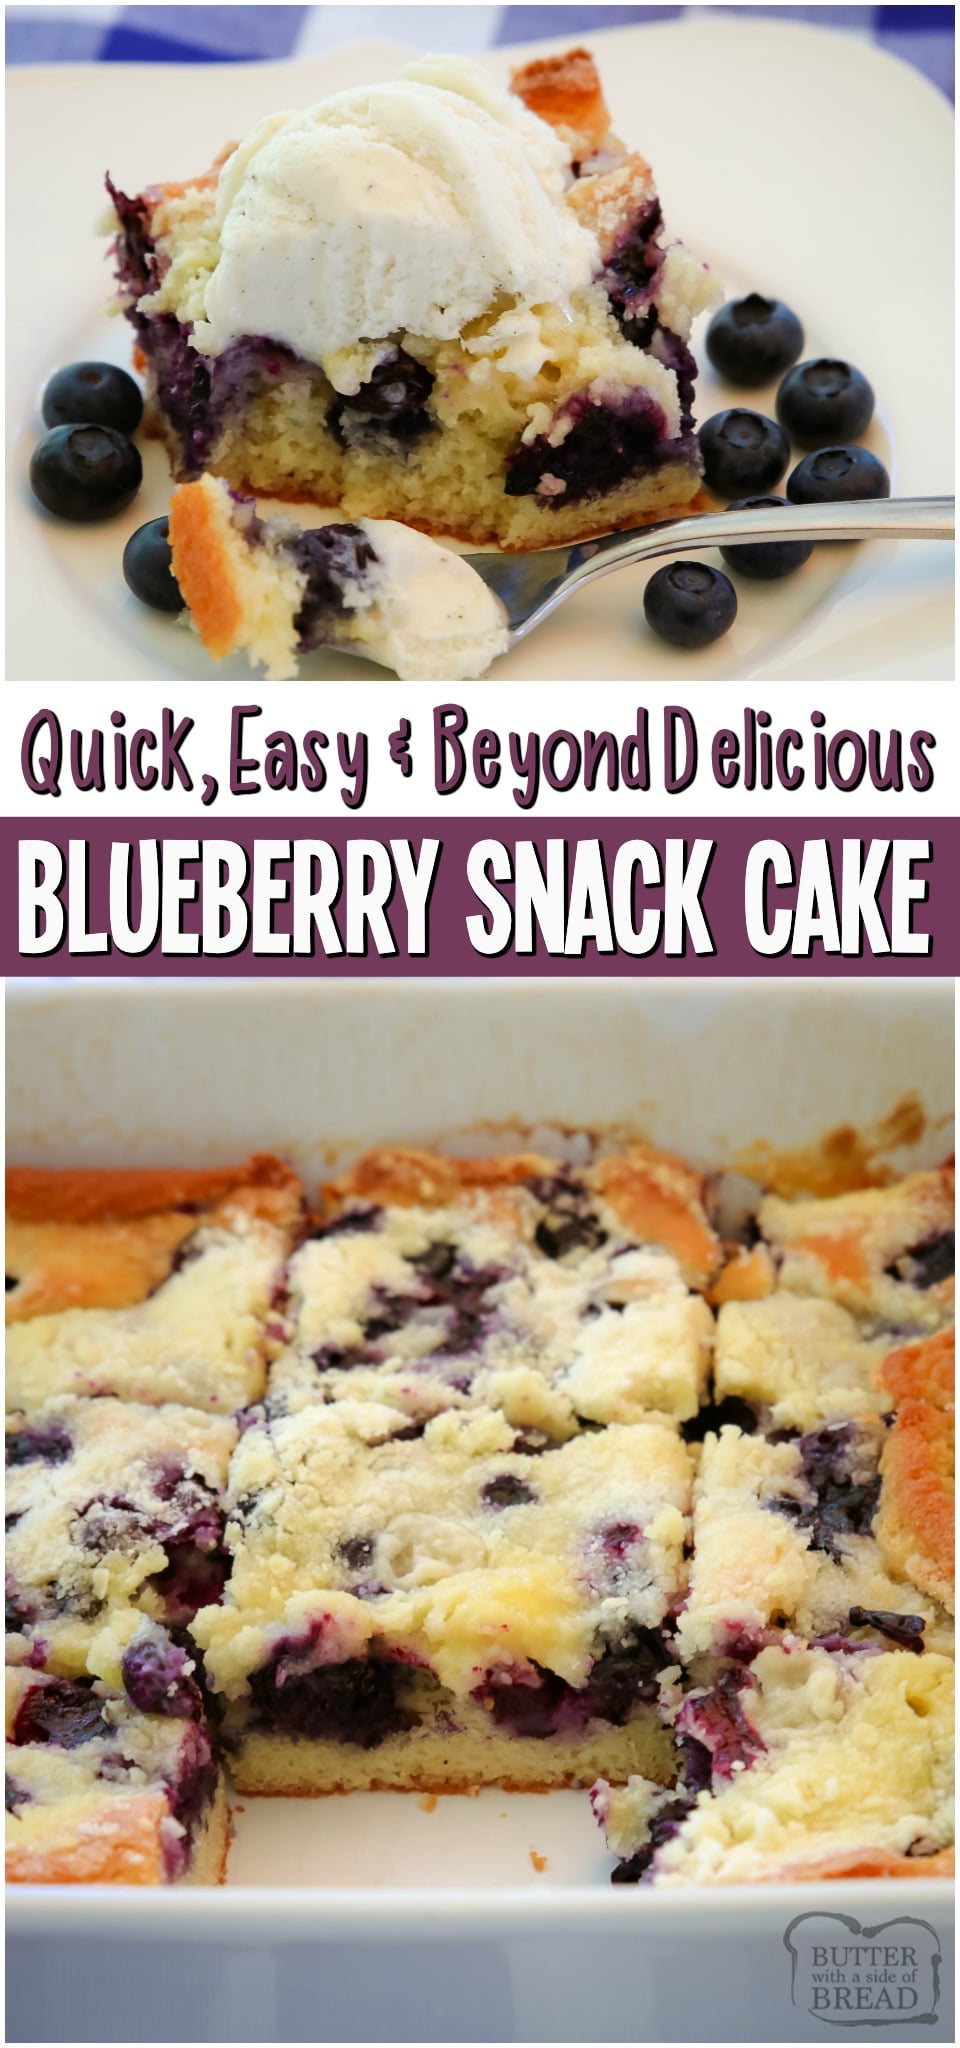 Easy Blueberry Cake recipe made with butter, sugar, flour, egg whites and blueberries of course! Simple snack cake topped with a buttery topping and baked with fresh blueberries.